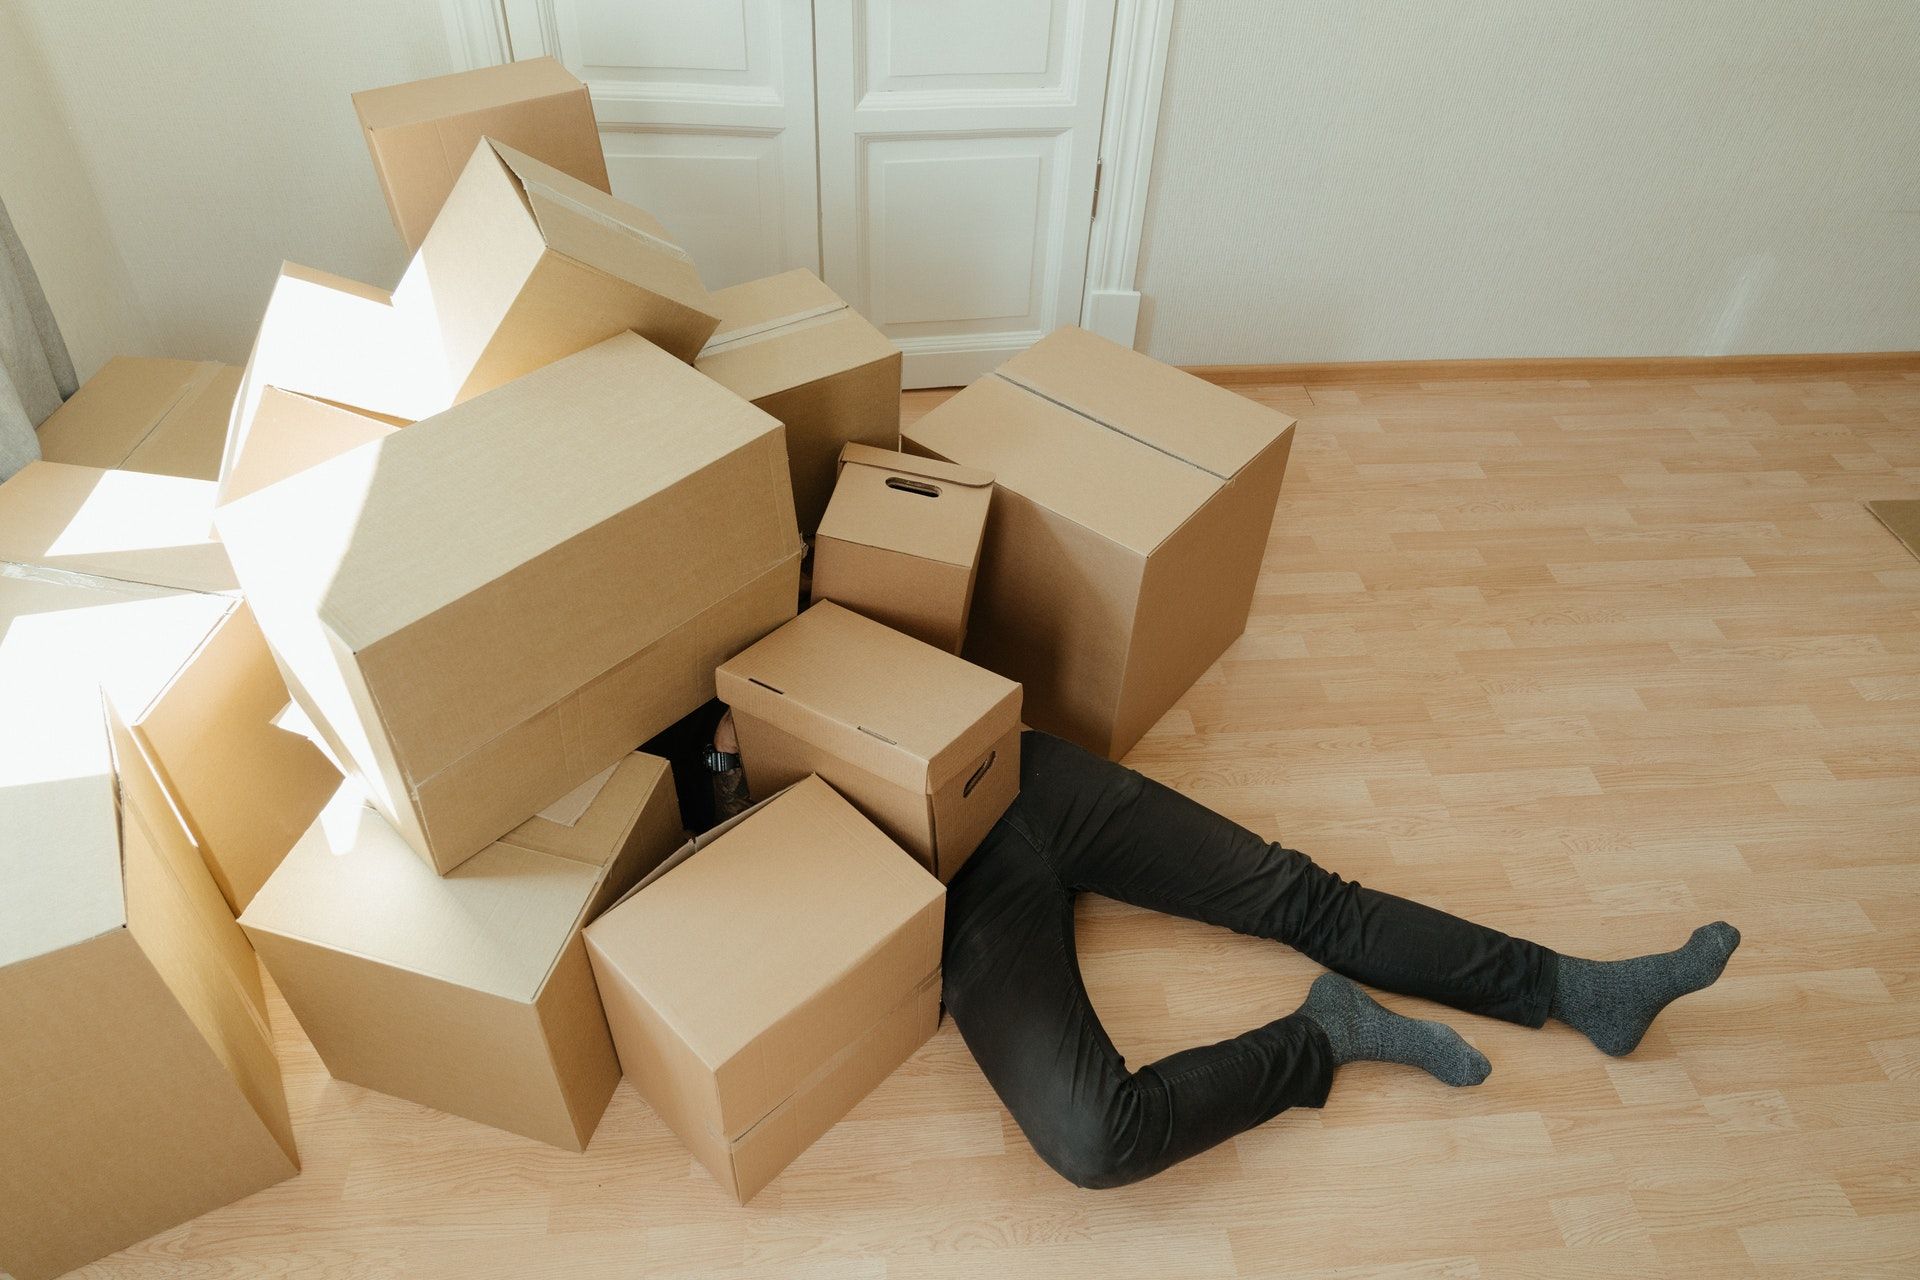 A man lying on the floor with a few cardboard boxes on him